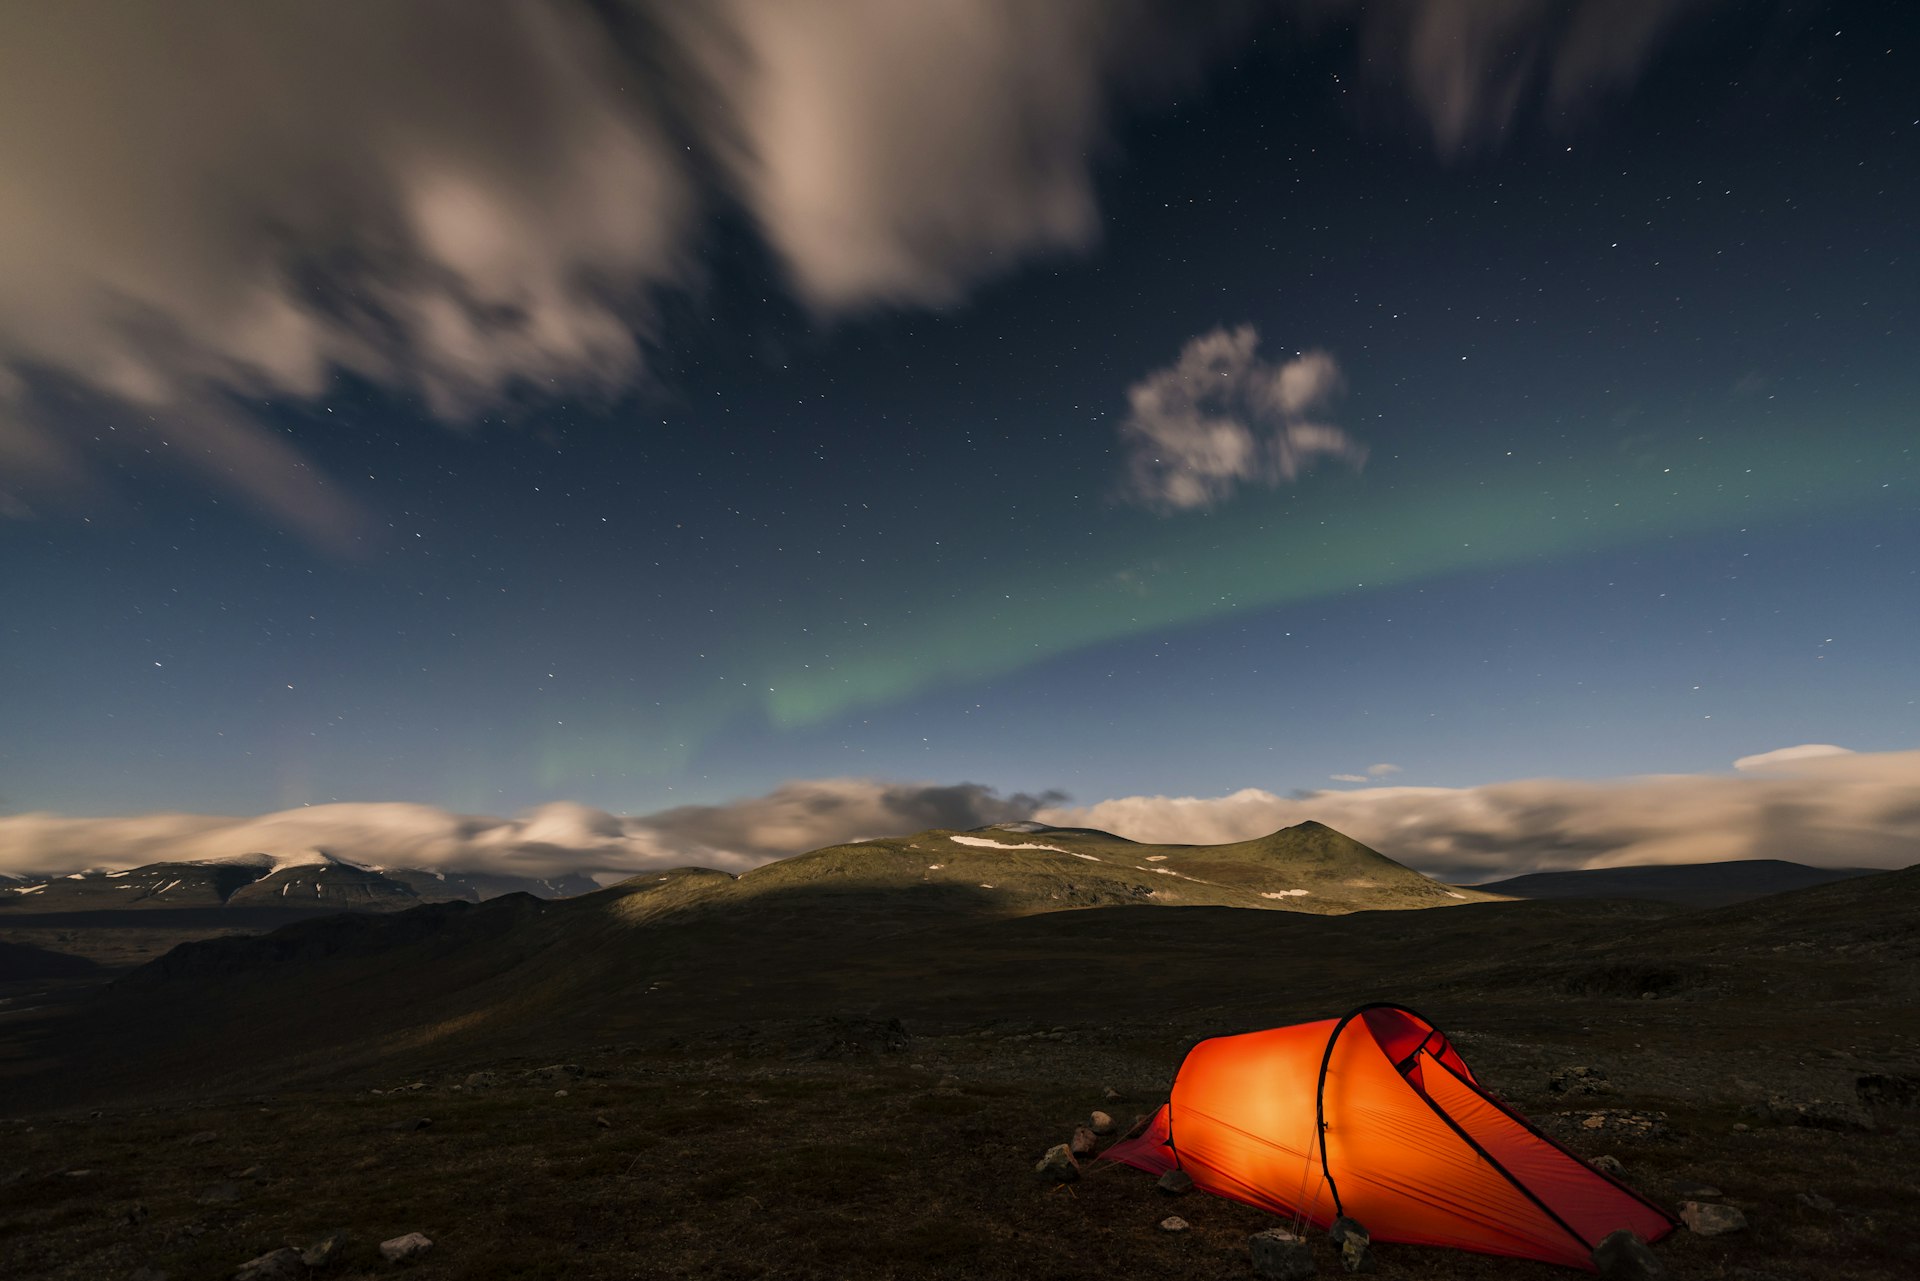 A tent lit up in orange under a night sky with a streak of green from the northern lights  